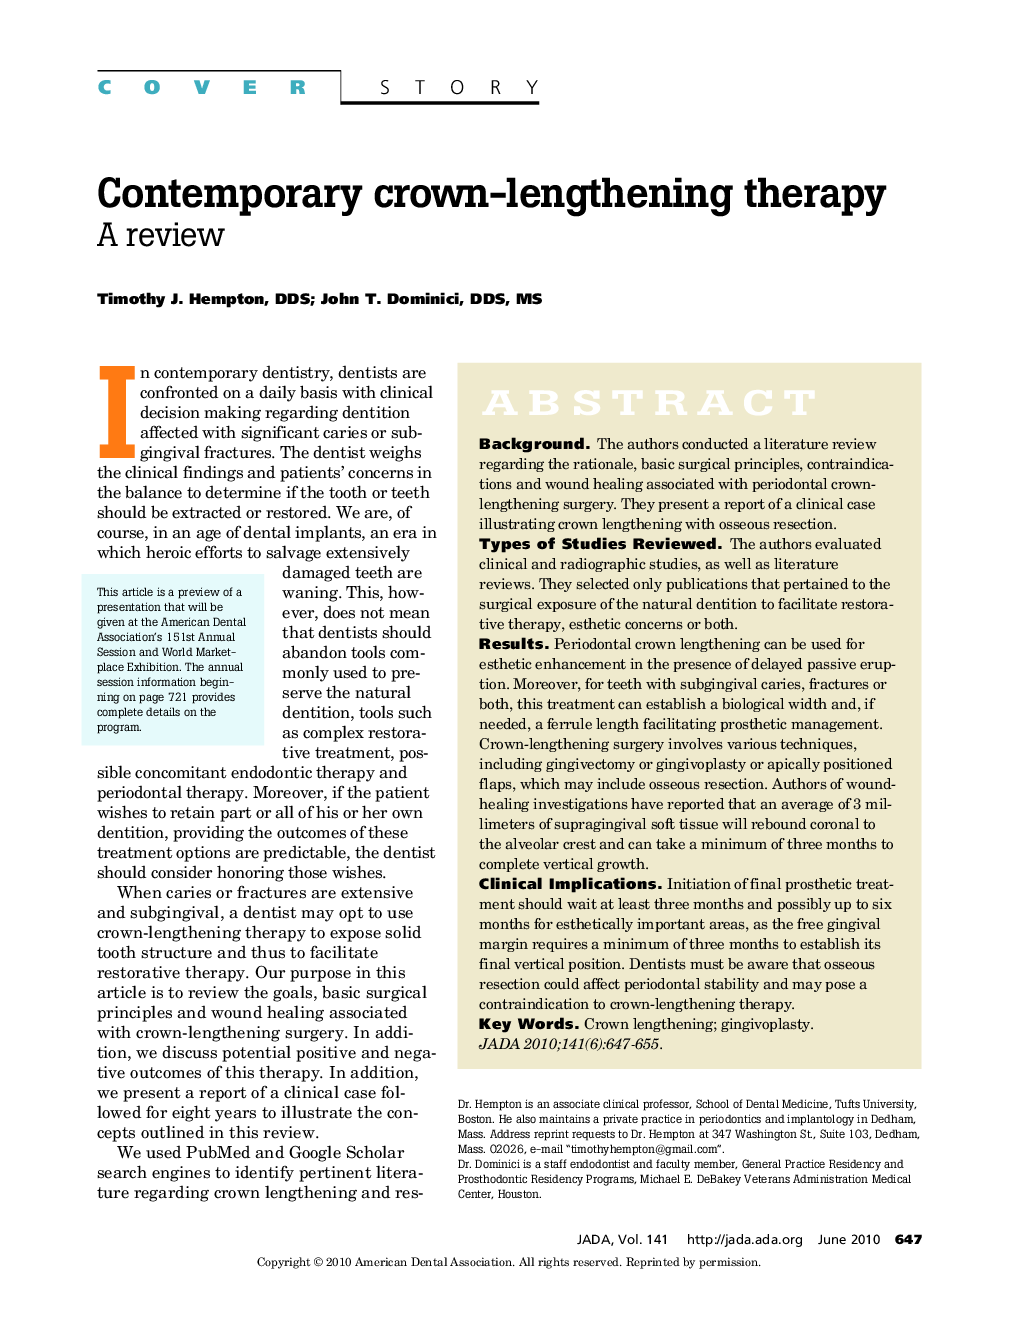 Contemporary Crown-Lengthening Therapy : A Review